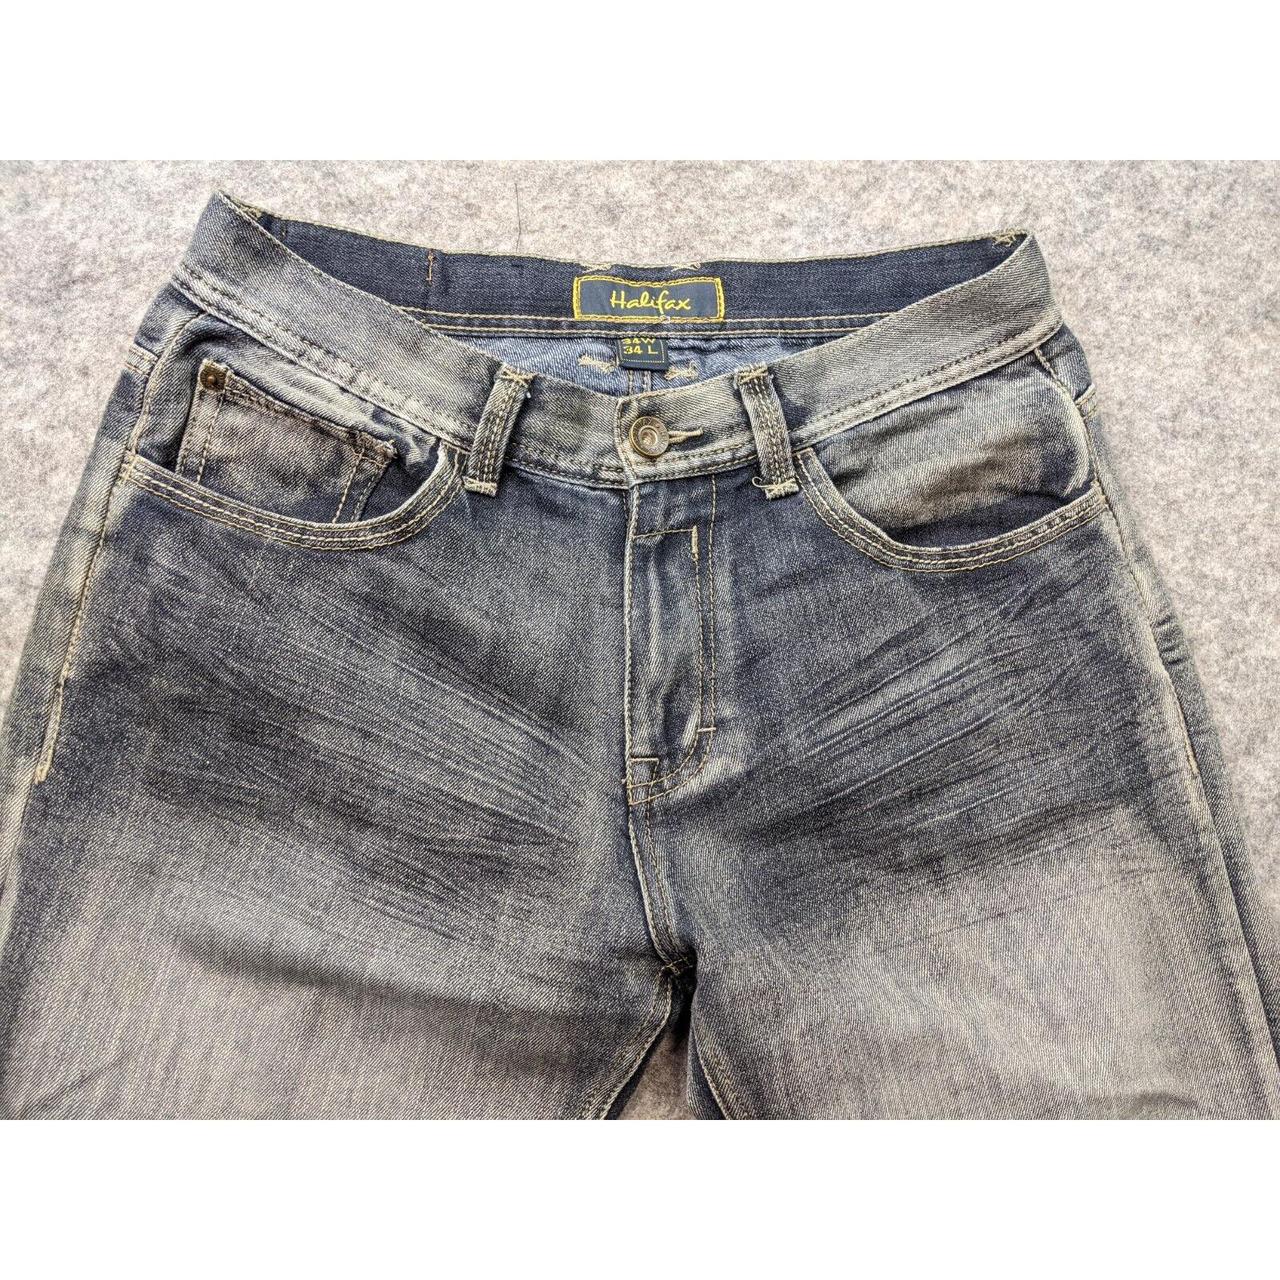 Product Image 2 - Halifax Jeans Men's 32 Straight